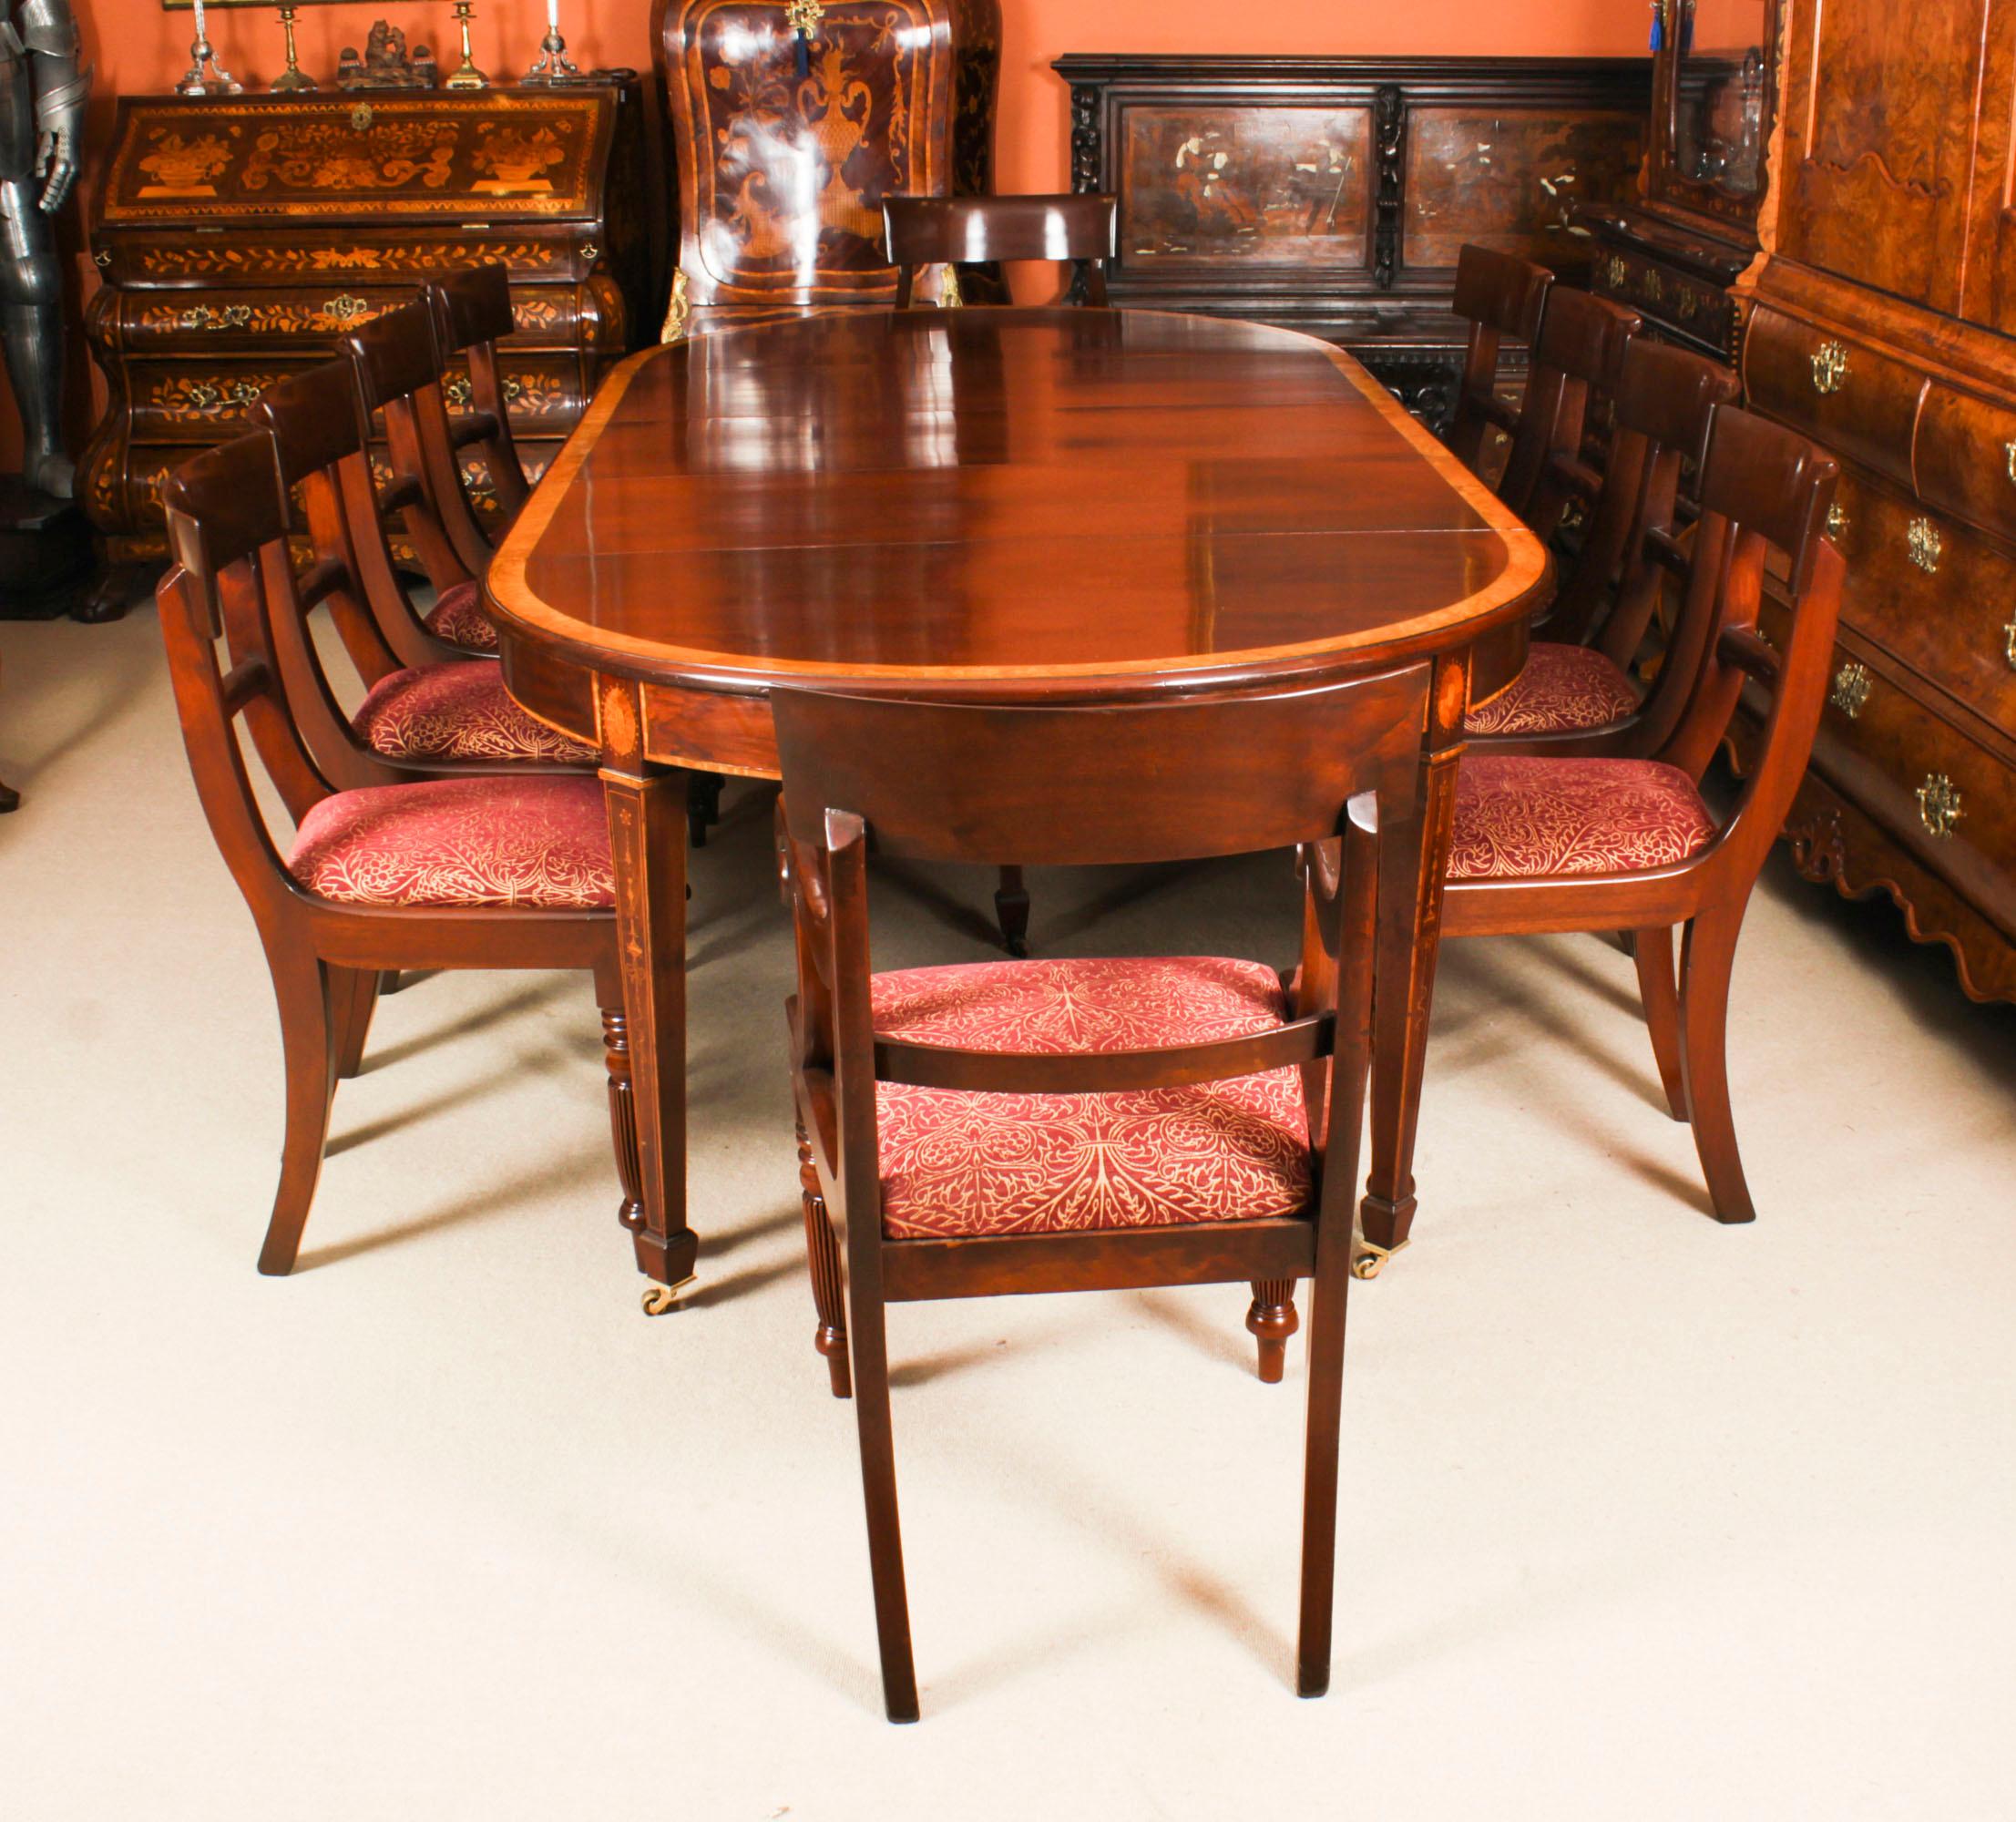 English Antique Edwardian Inlaid Flame Mahogany Extending Dining Table Early 20th C.